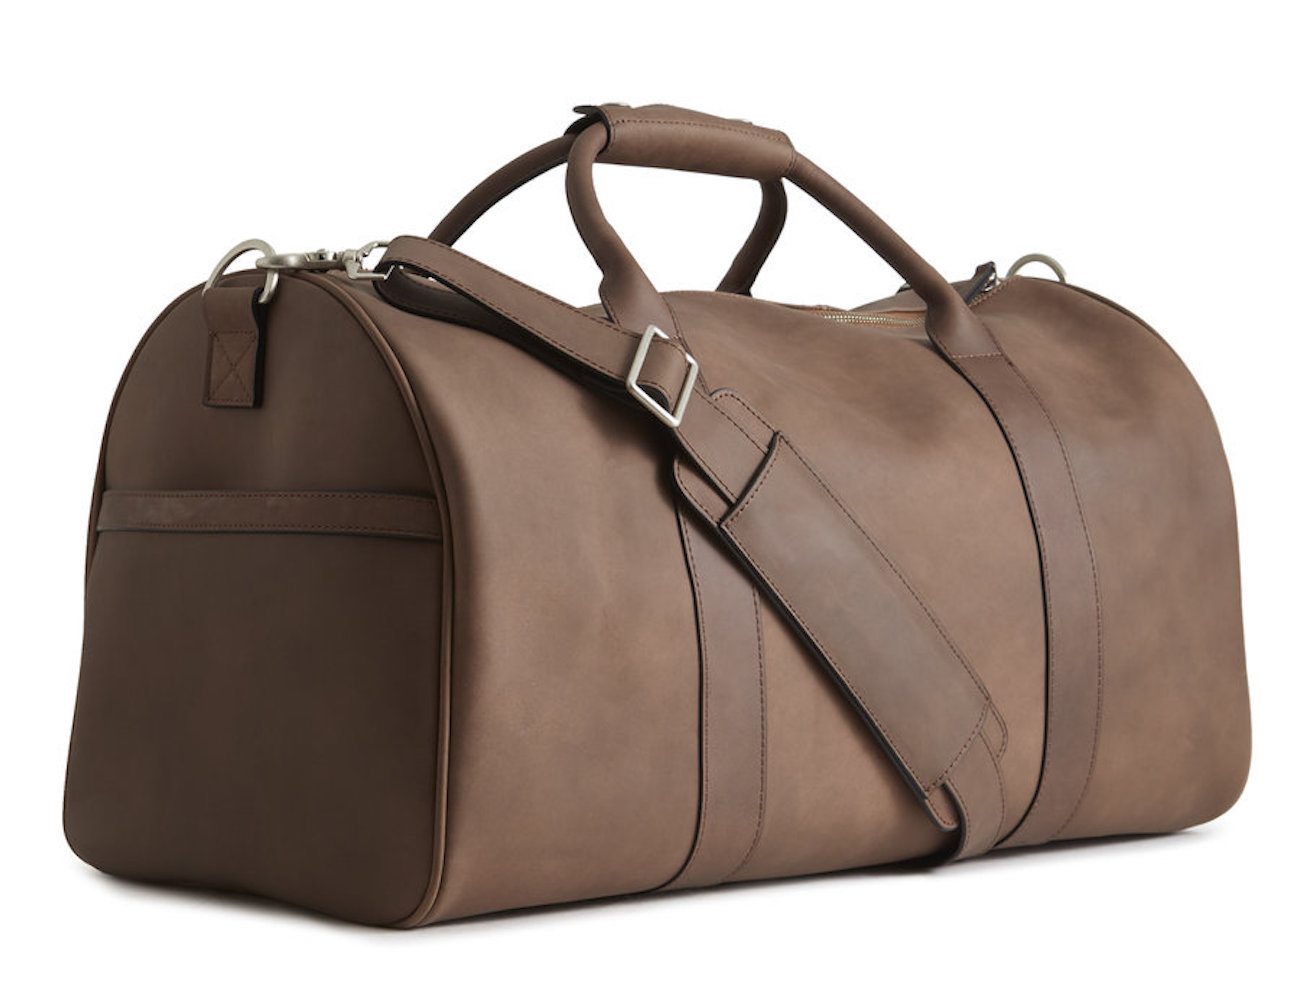 Luxury Leather Duffle Bag by JackThreads » Gadget Flow